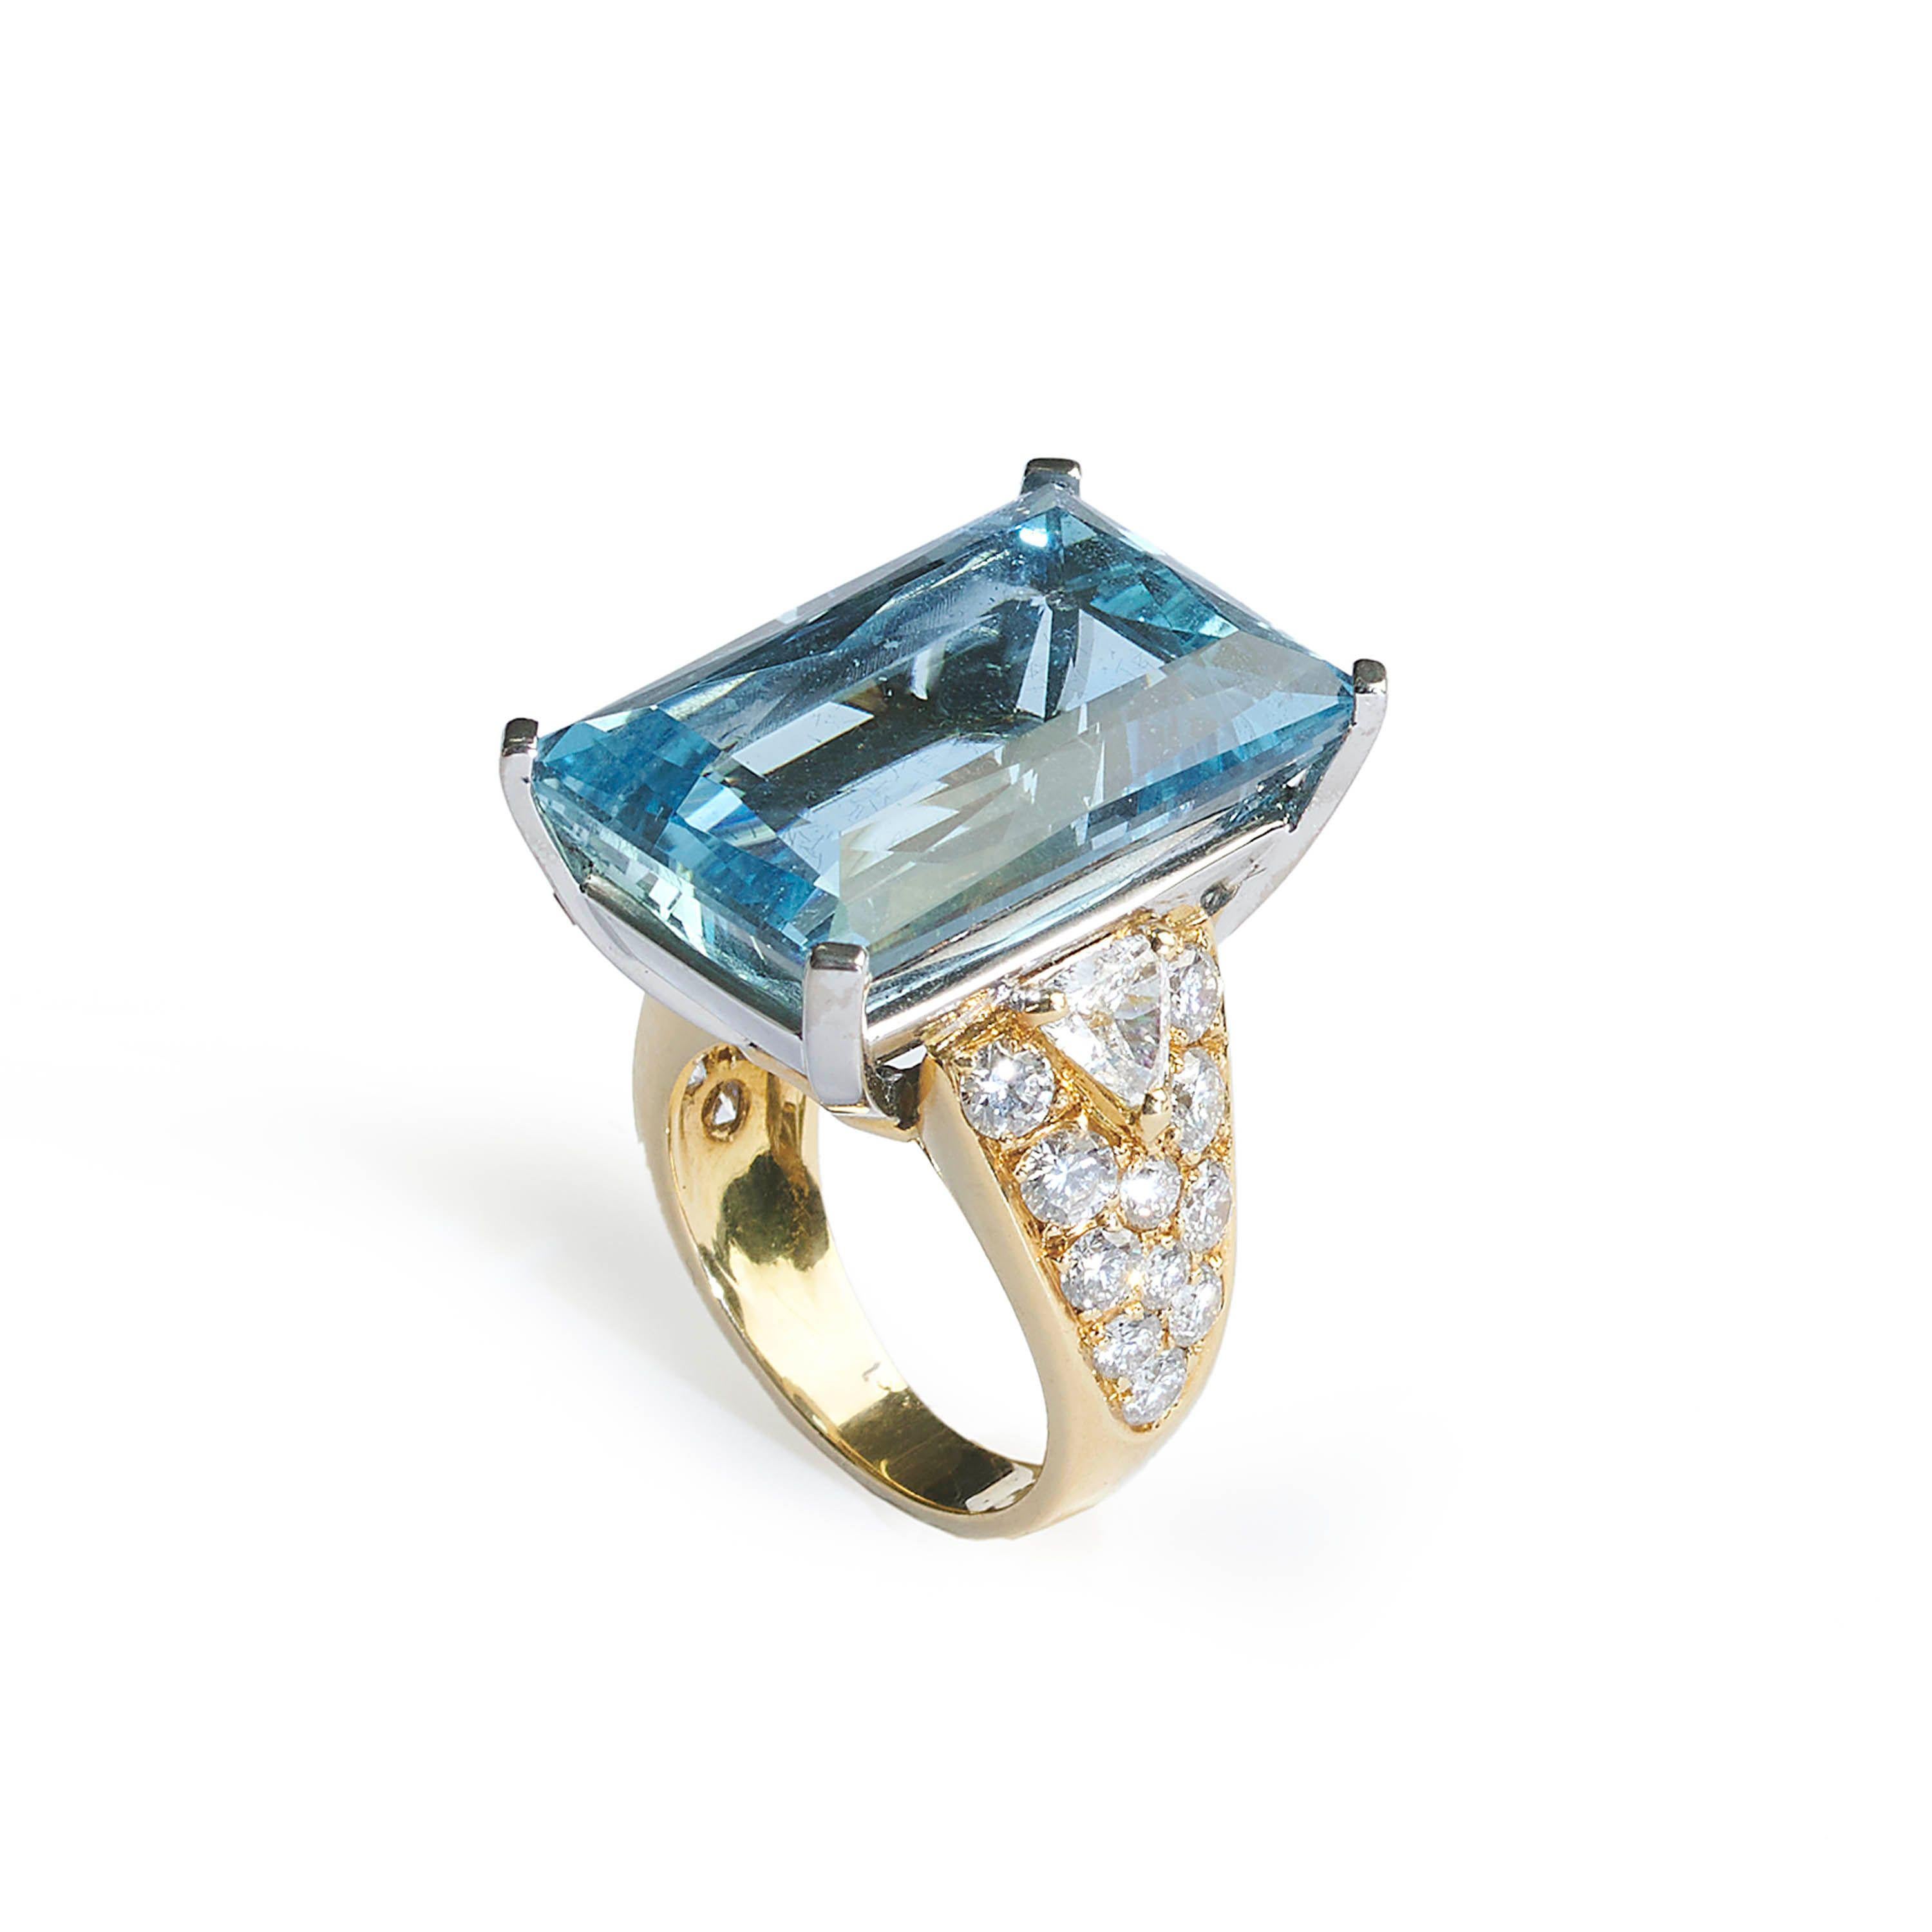 Vintage Italian Repossi Aquamarine, Diamond And Gold Dress Ring, 35.00 Carats In Good Condition For Sale In London, GB